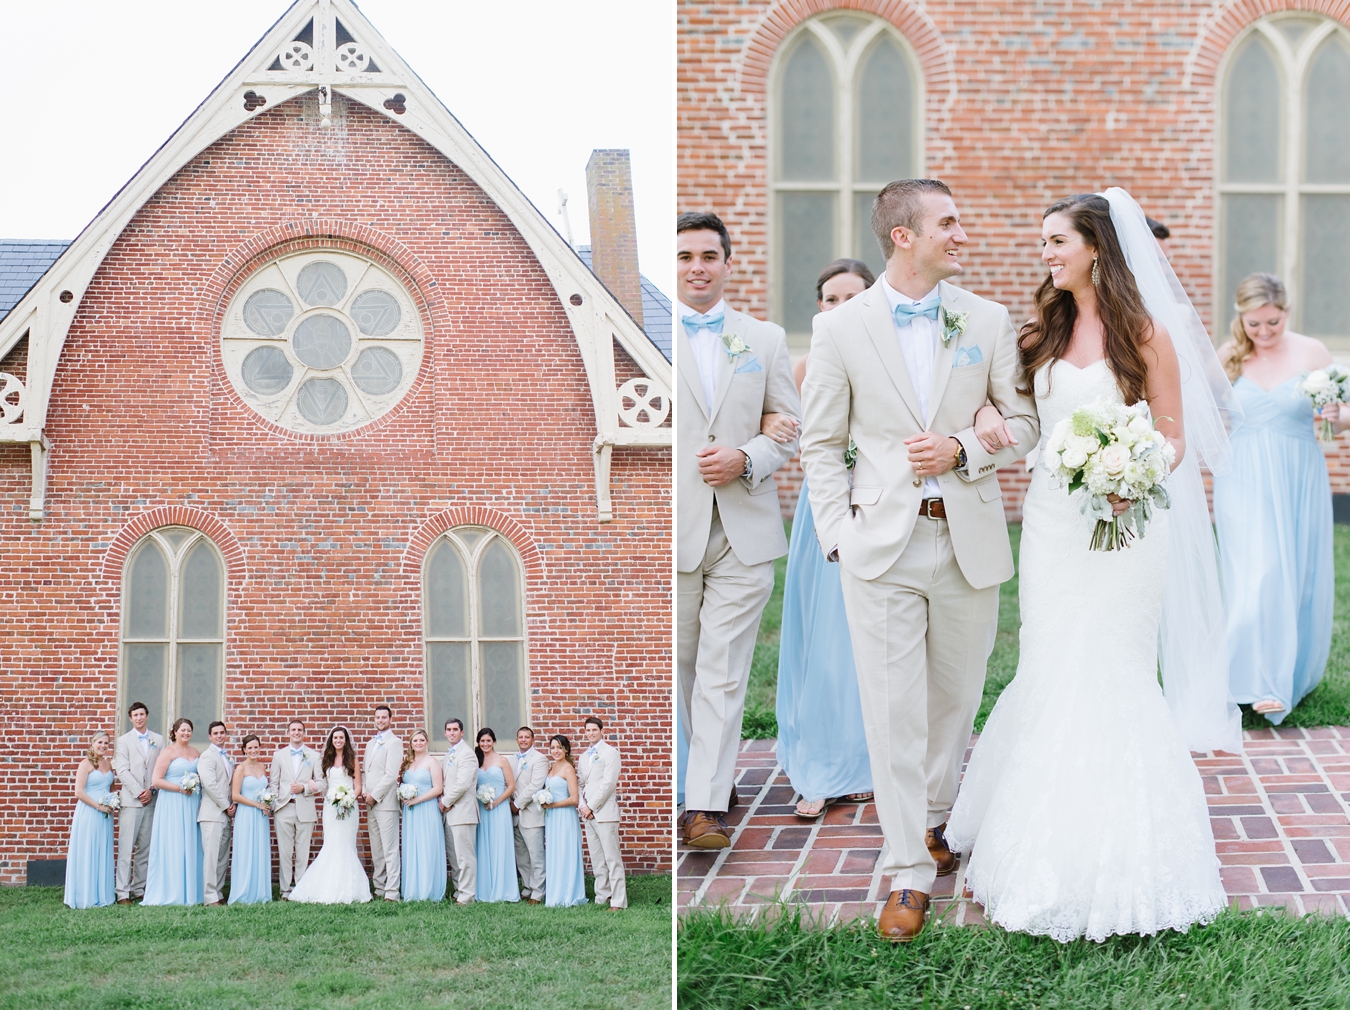 Wedding at St. Peter the Apostle Church in Queenstown, Maryland by Natalie Franke Photography